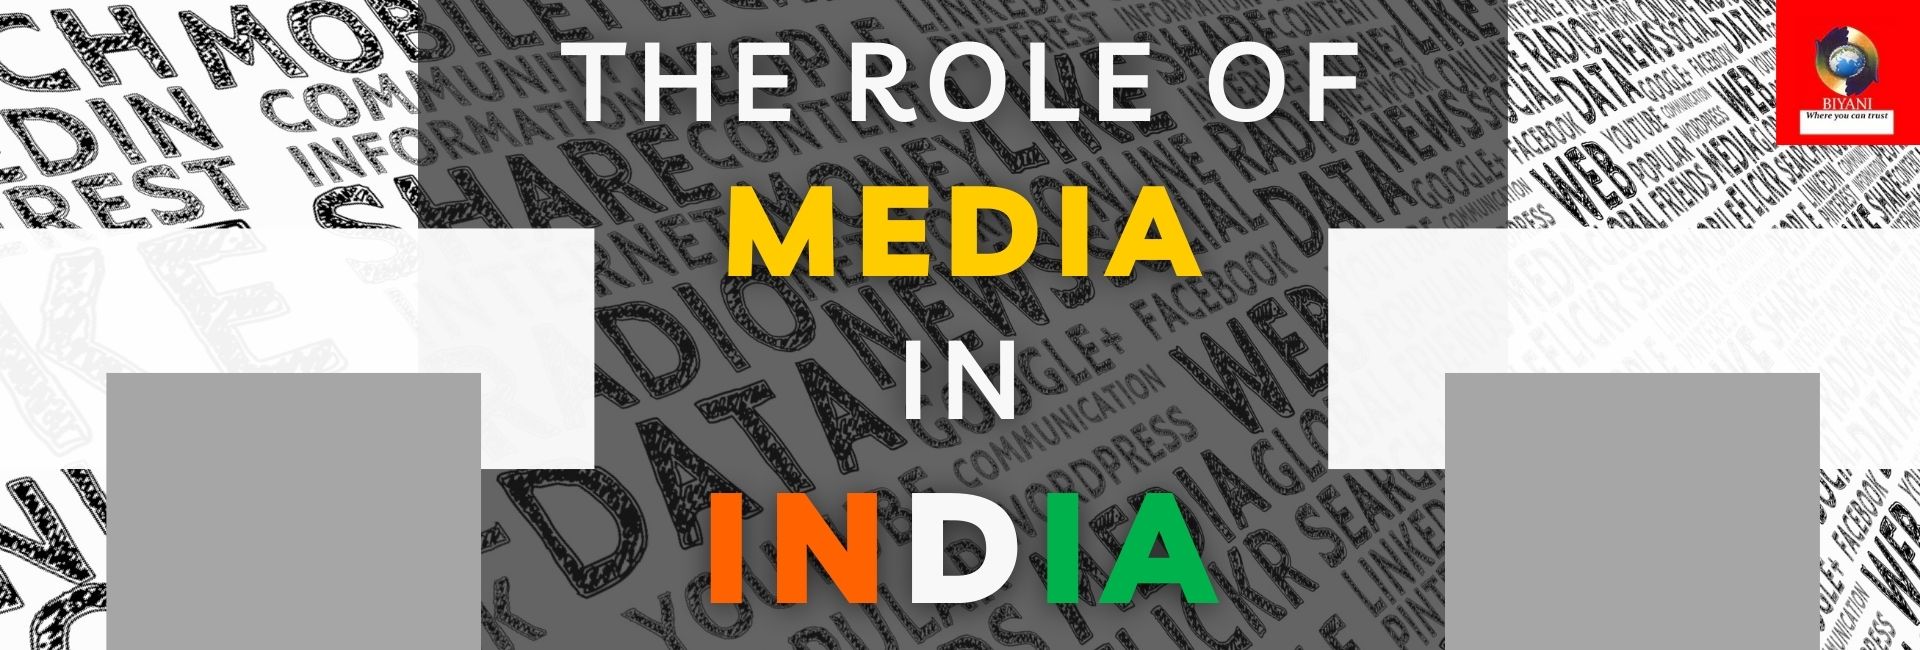 the role of media